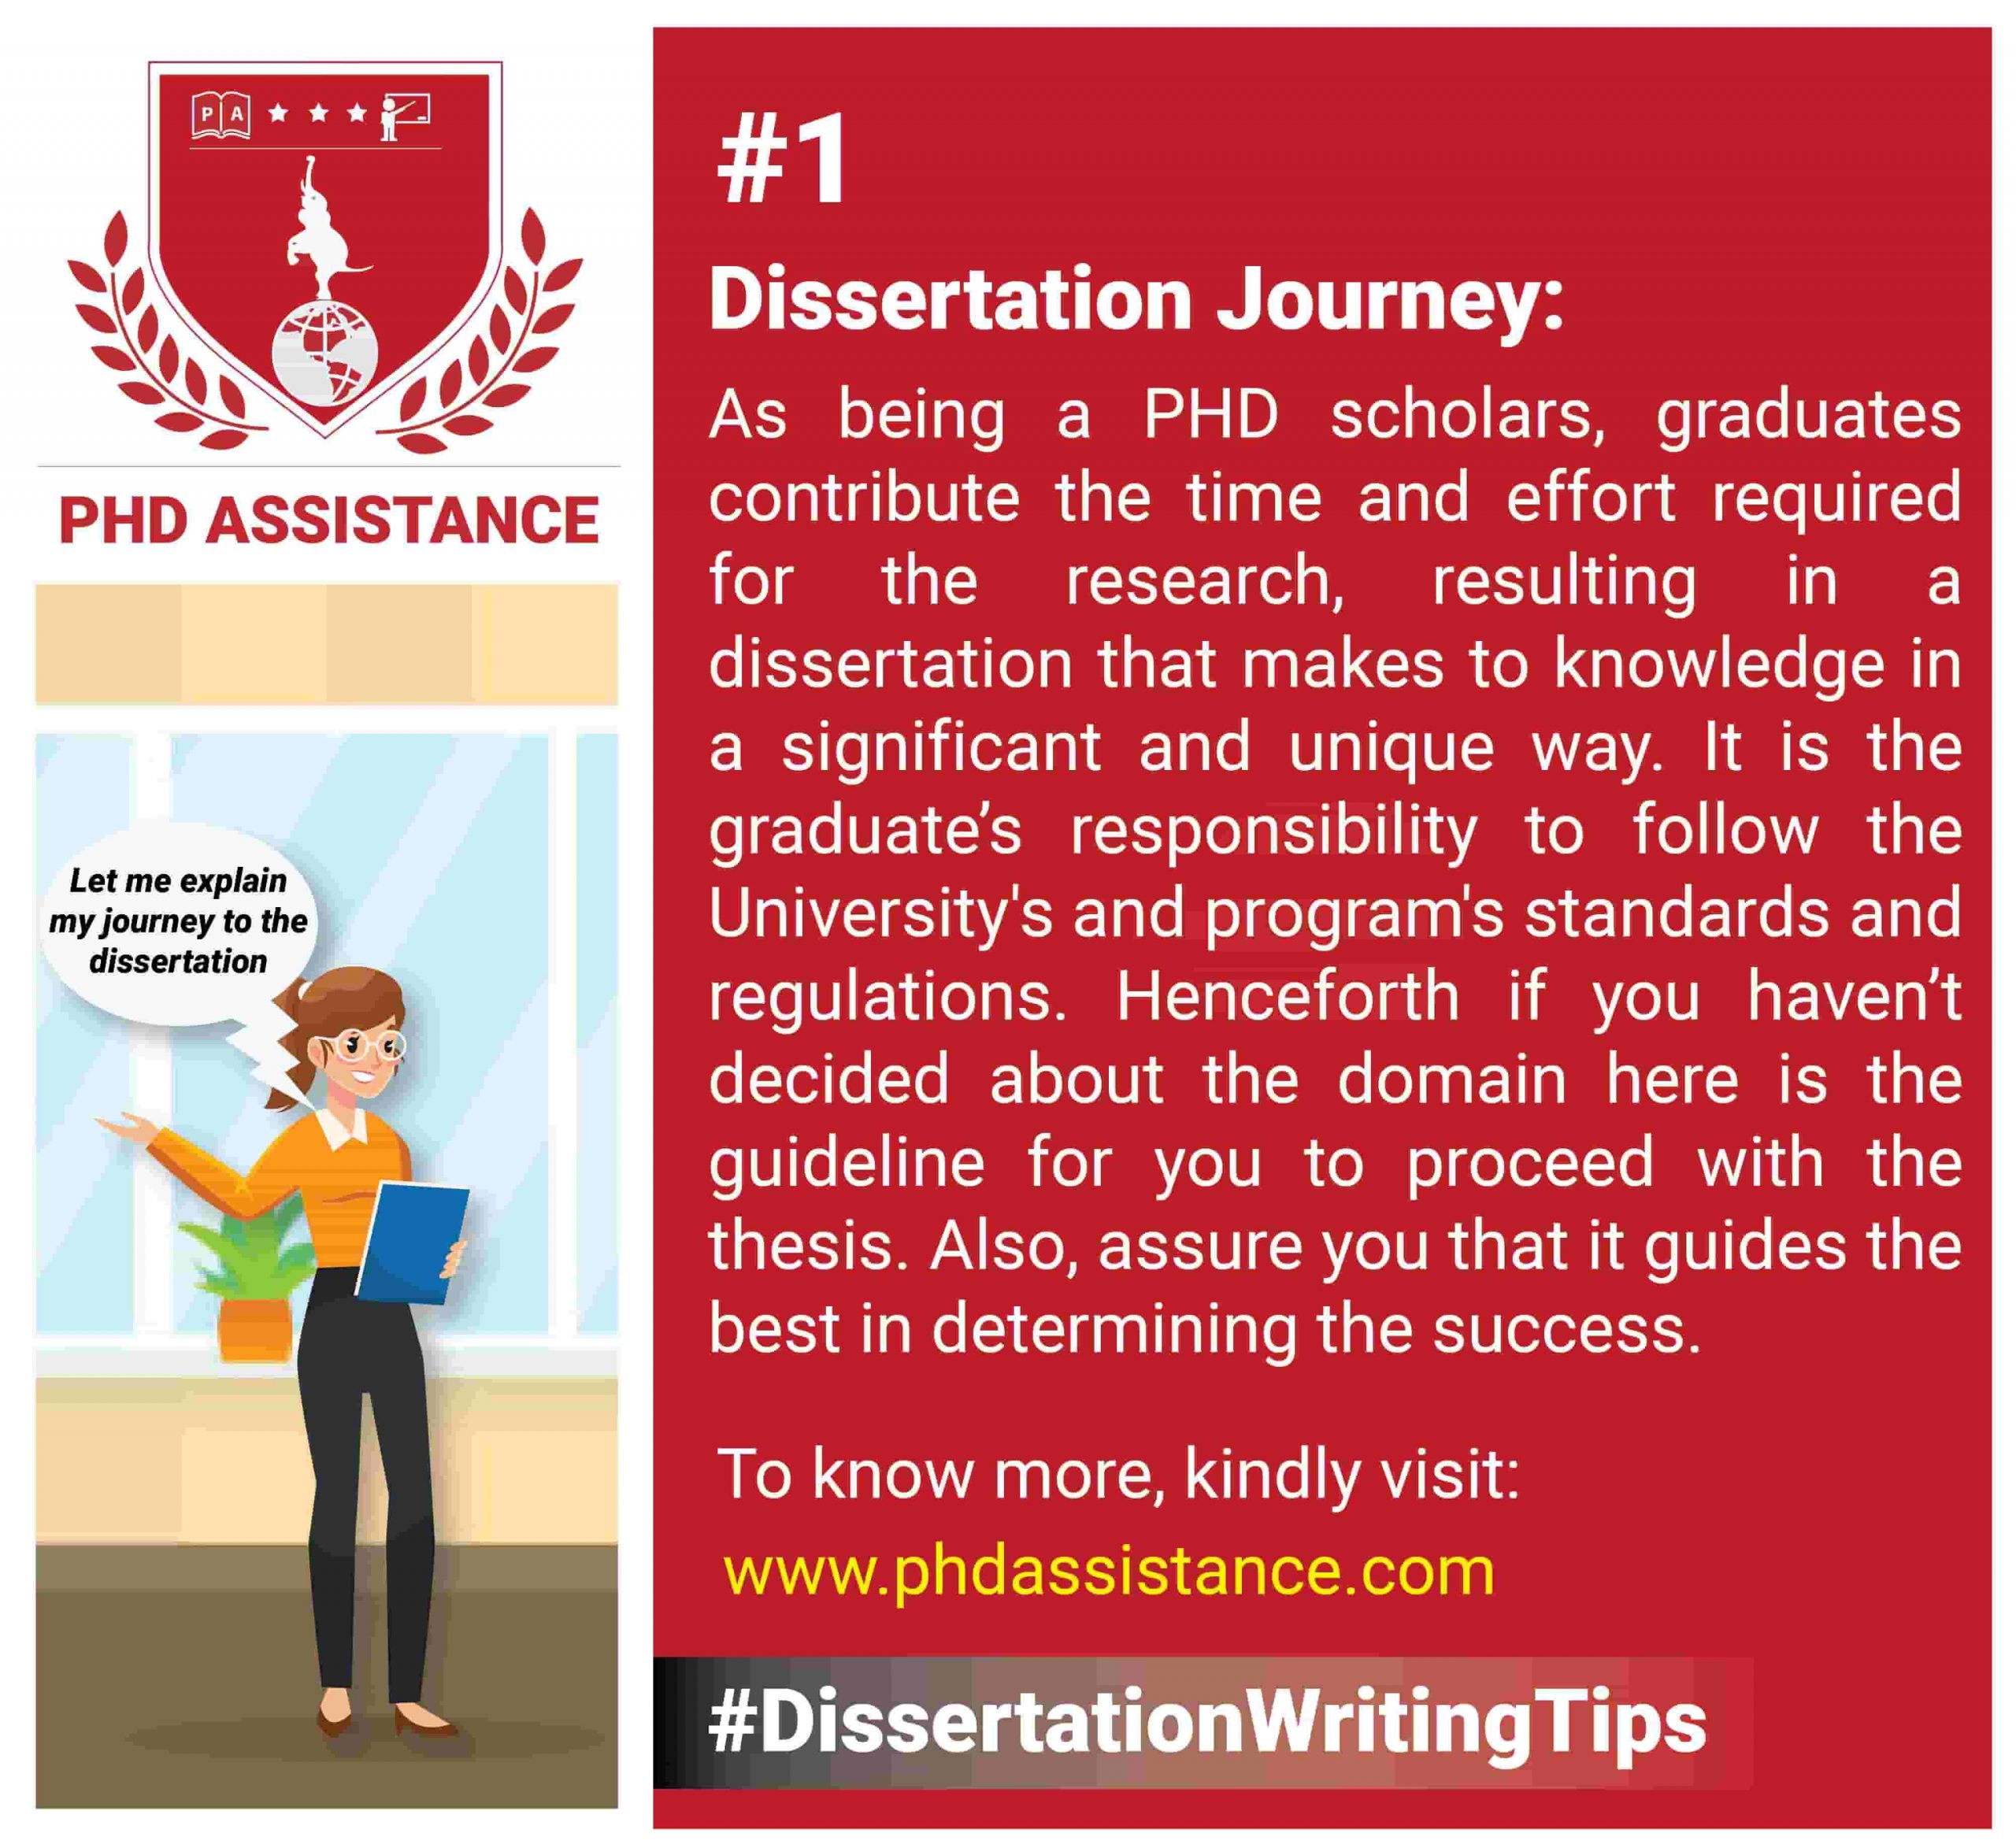 the dissertation journey second edition